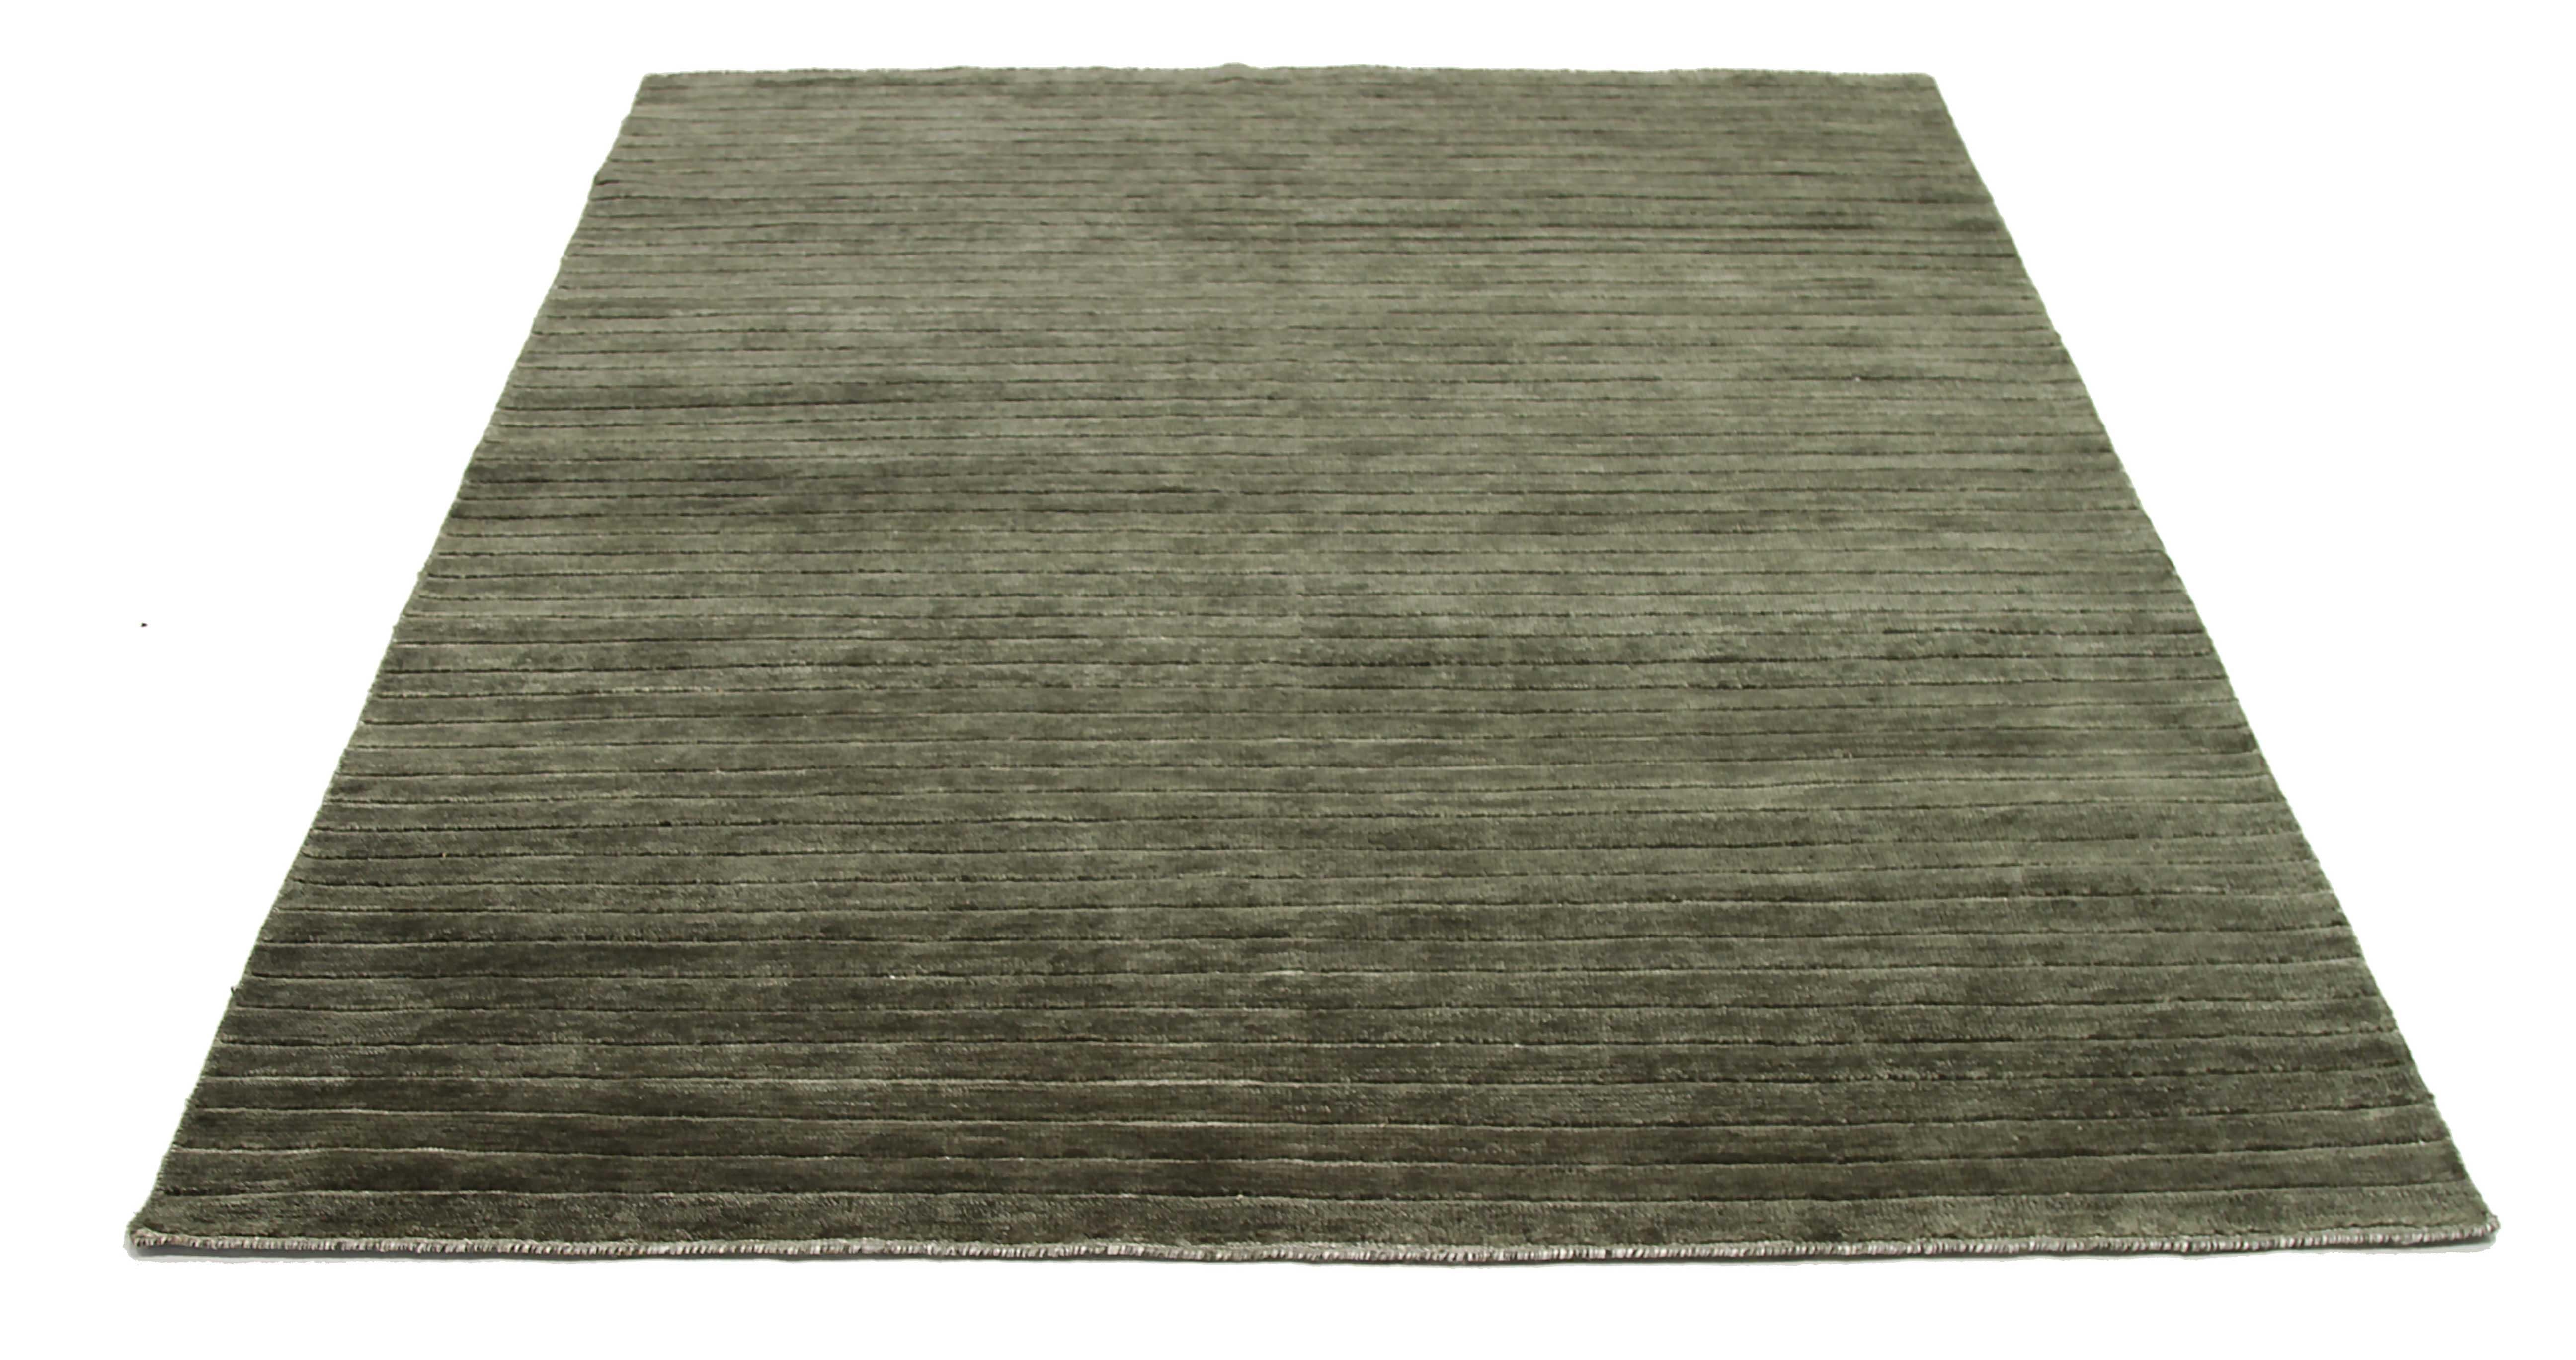 New area rug handwoven from the finest sheep’s wool. It’s colored with all-natural vegetable dyes that are safe for humans and pets. It has a nice 6’ x 8’ dimension that works perfectly in small to medium-sized rooms. 

Cameron collection is our